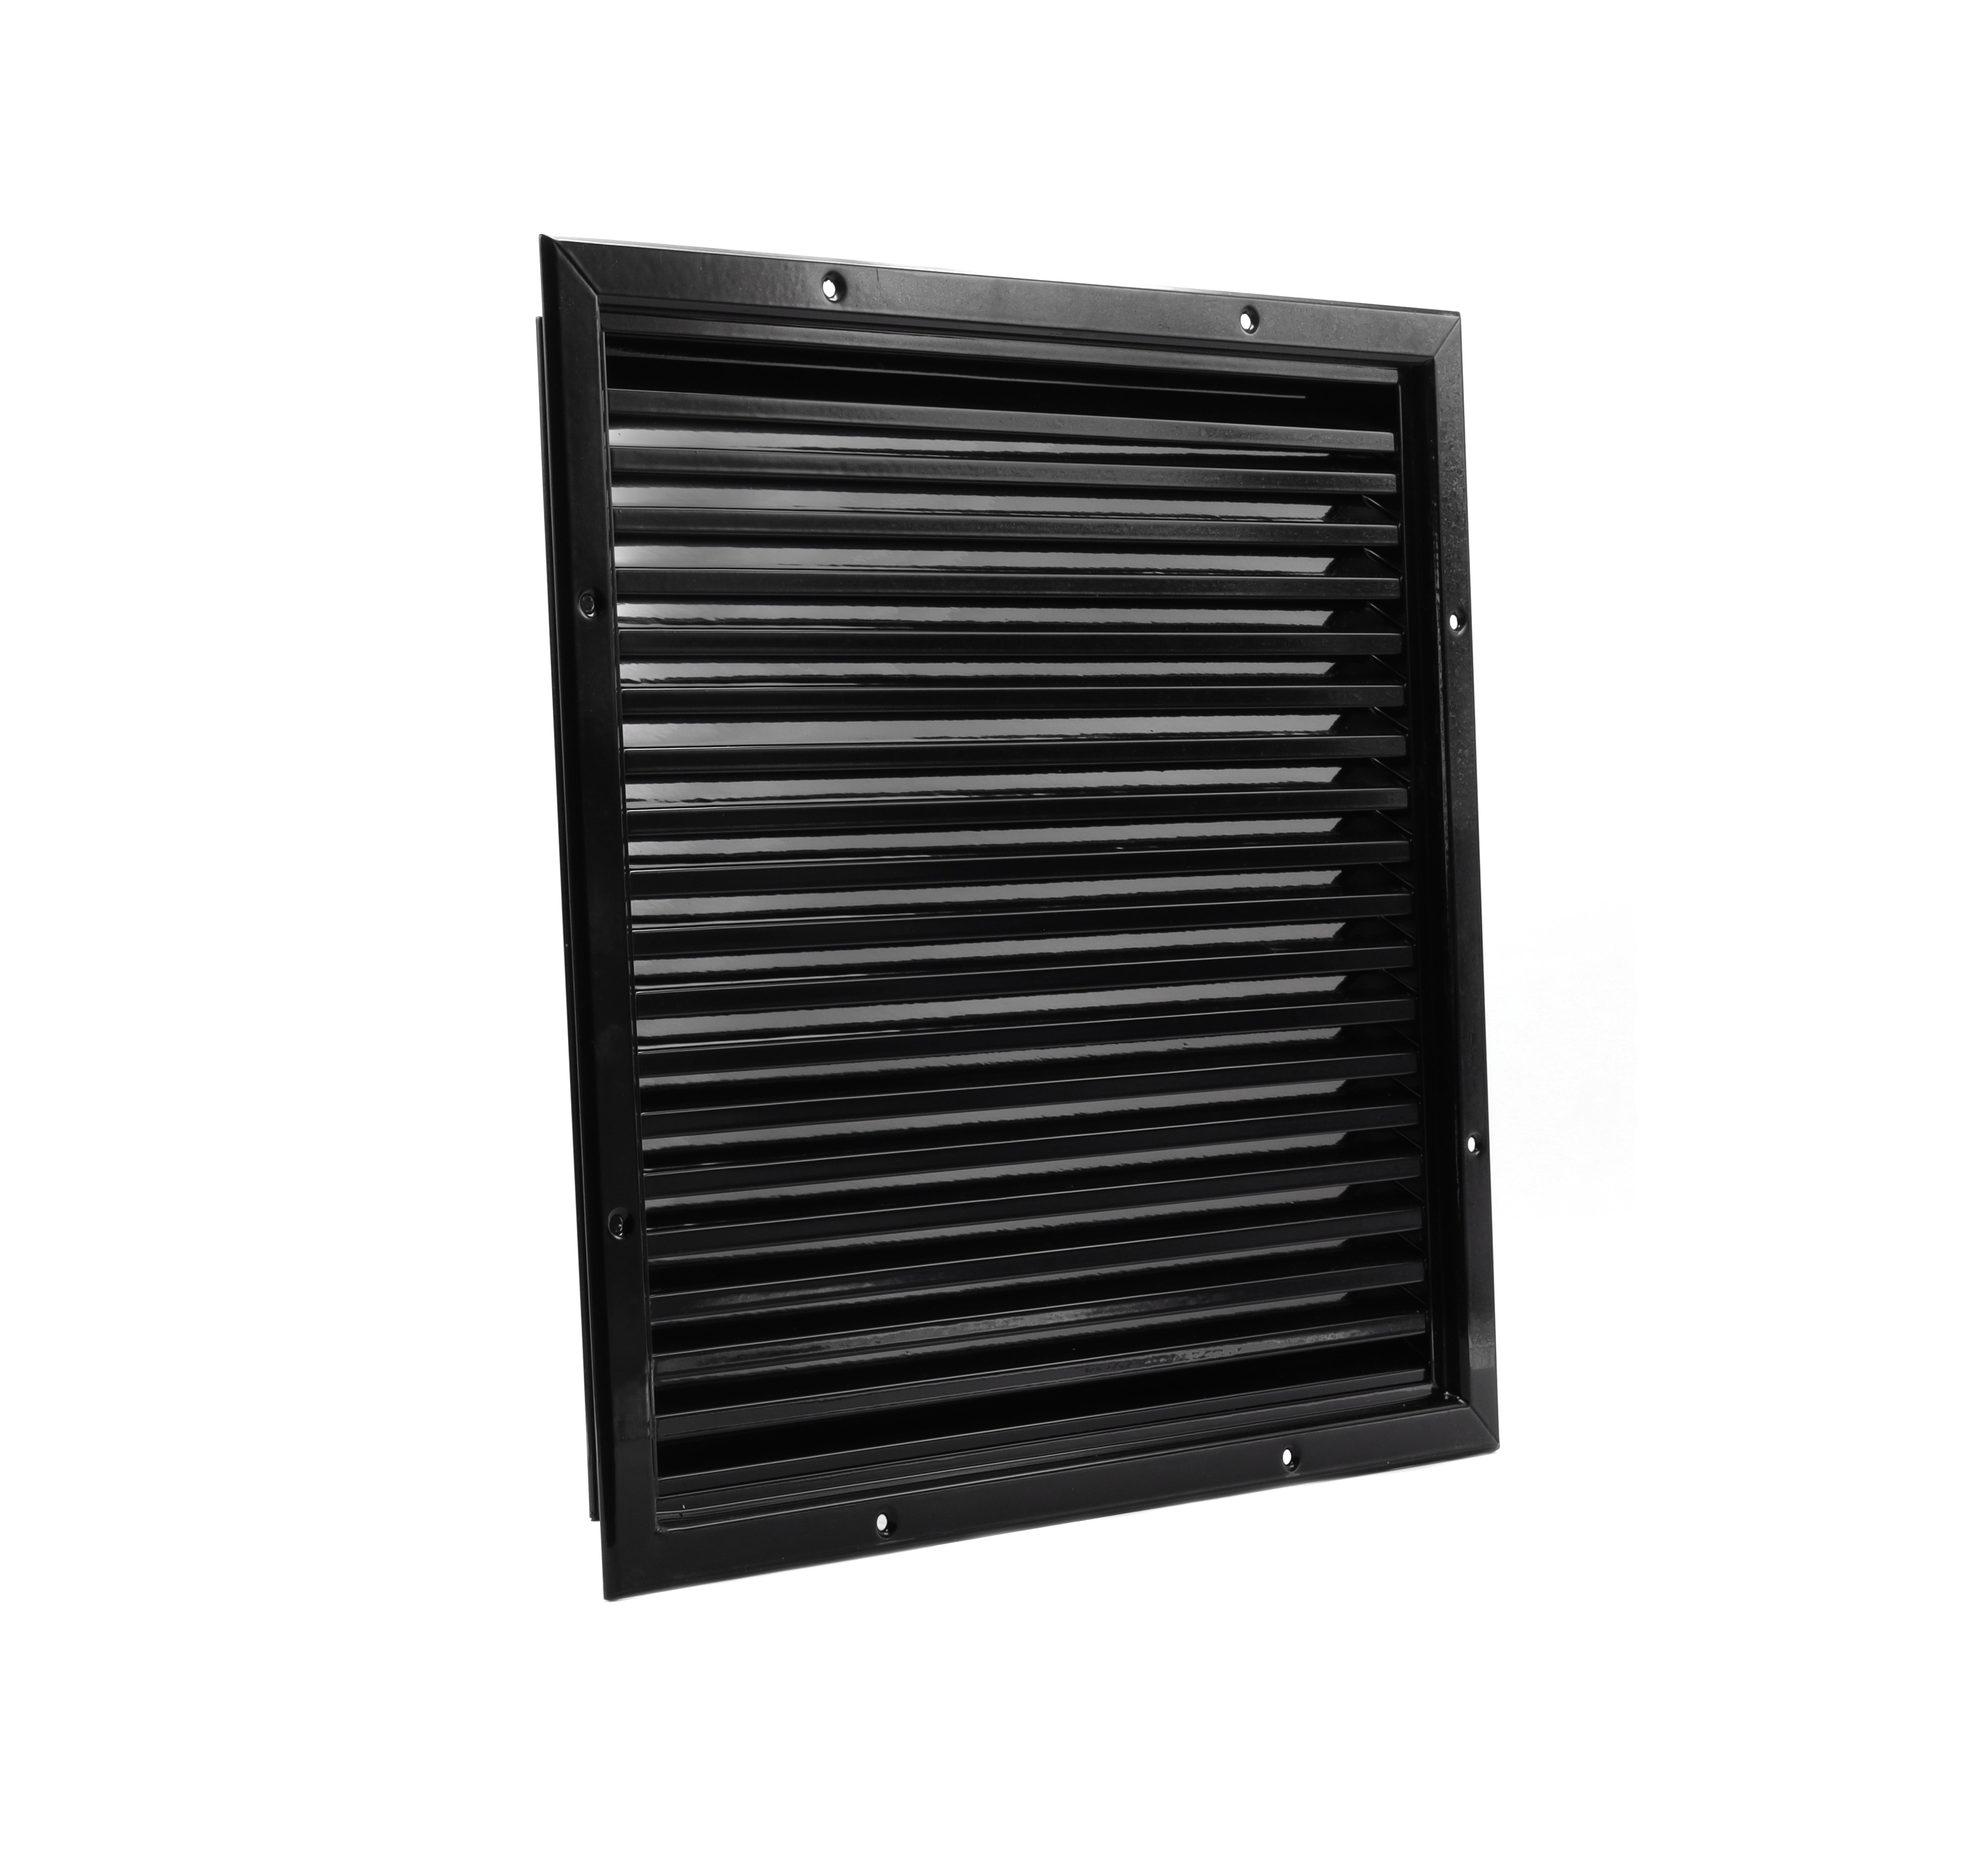 62704701 Aluminium wall grille fixed louvres 400x400mm black